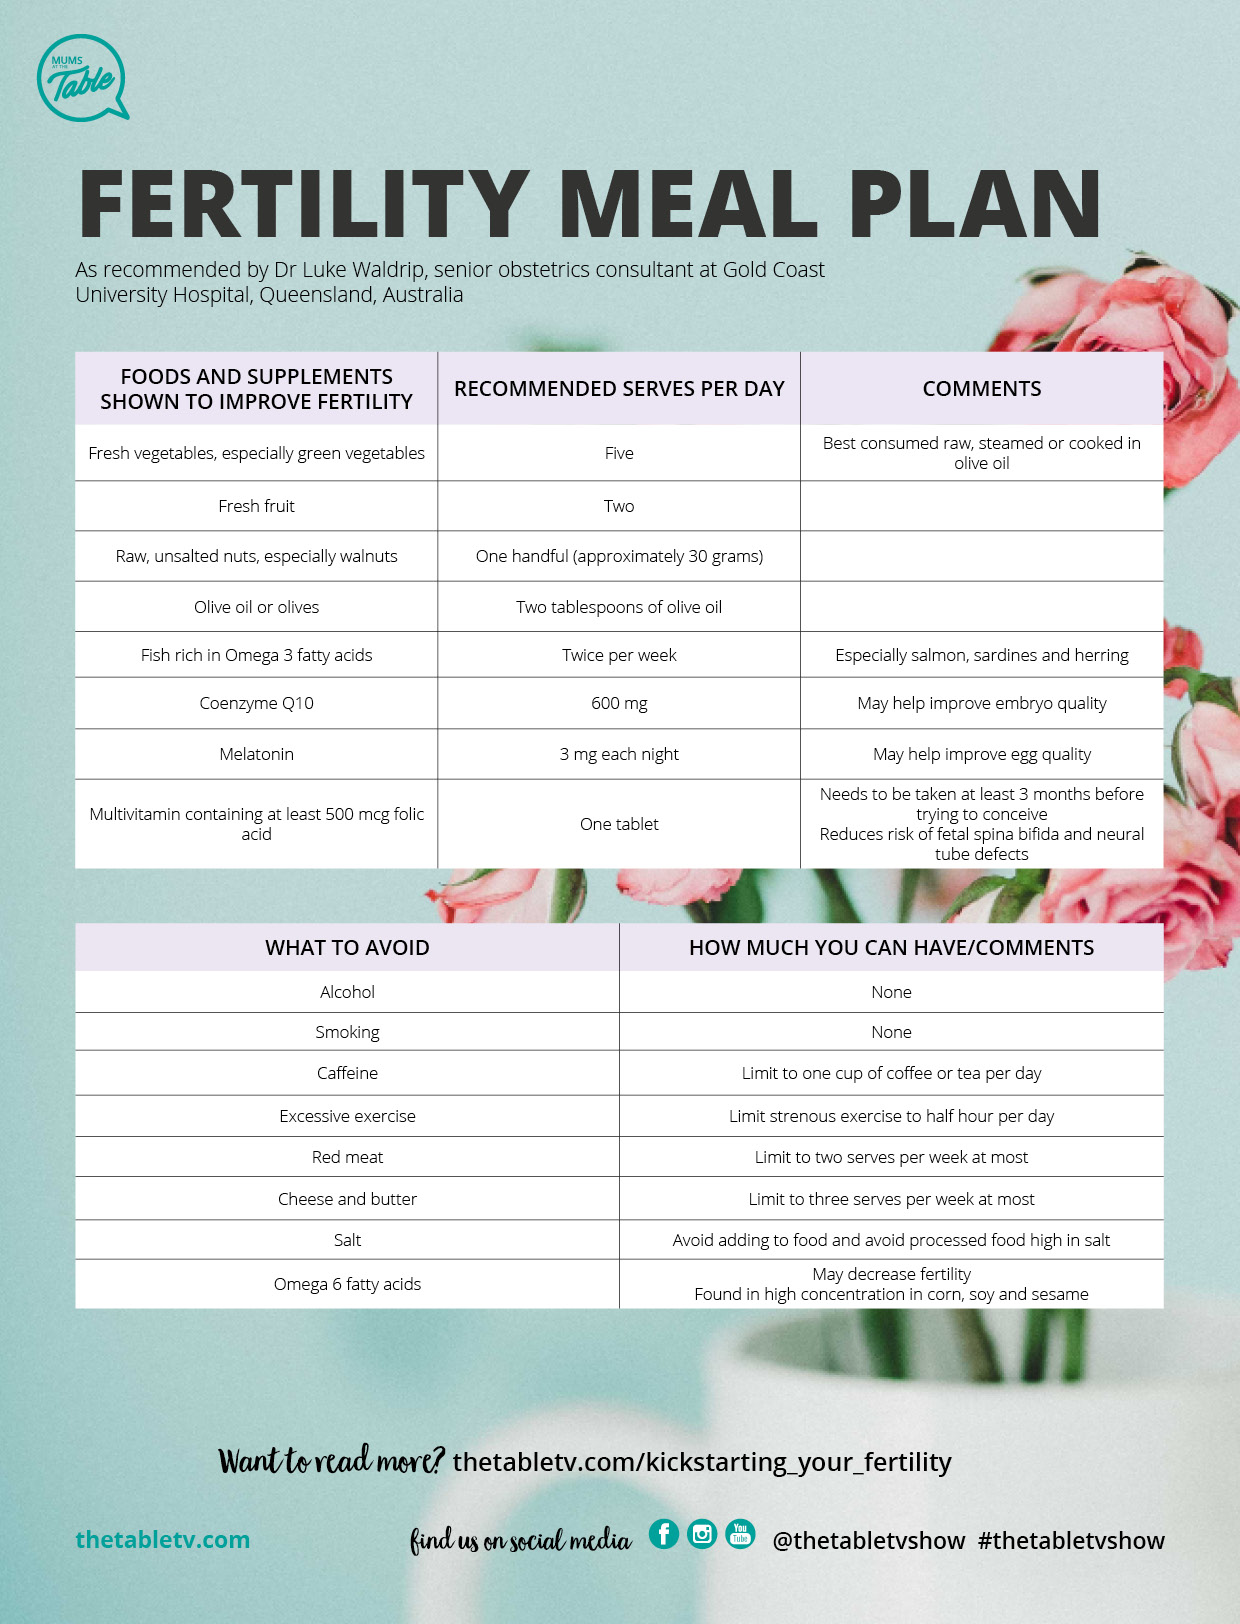 This fertility meal plan has the potential of kickstarting your fertility